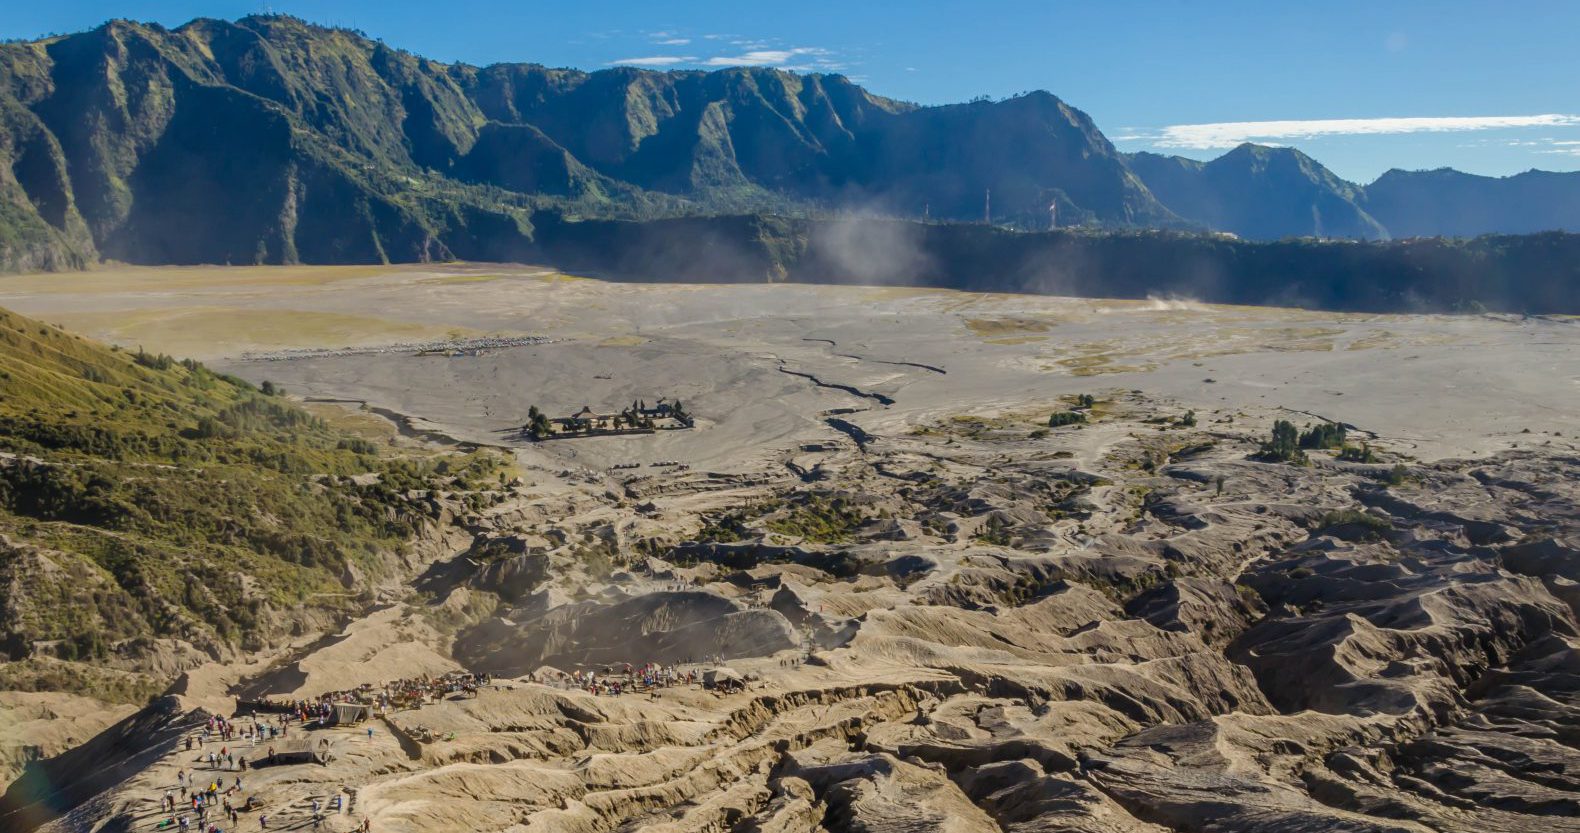 Sea of Sand, seen from the edge of the Bromo Volcano